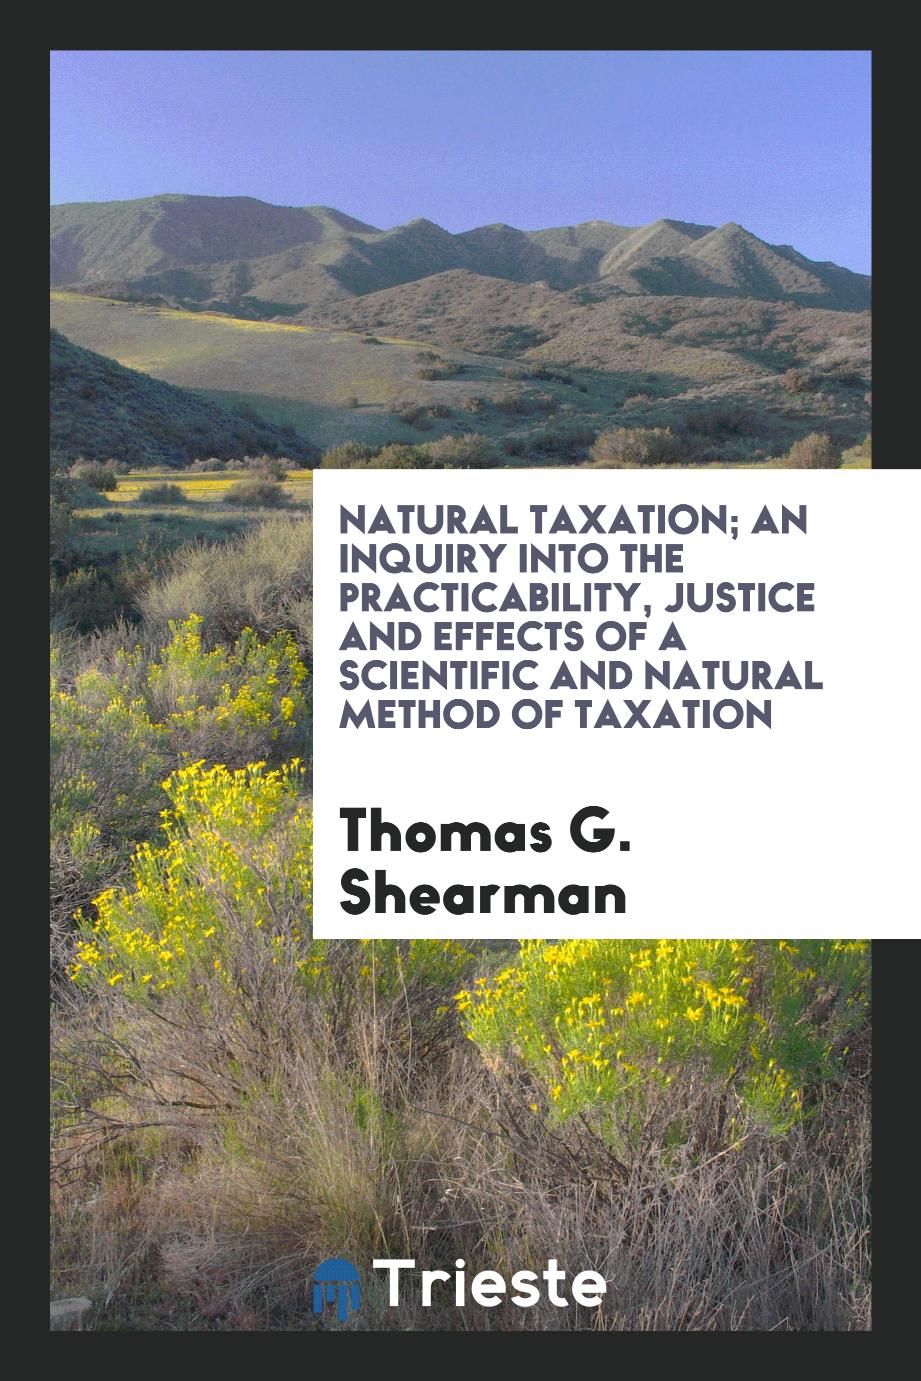 Natural taxation; an inquiry into the practicability, justice and effects of a scientific and natural method of taxation